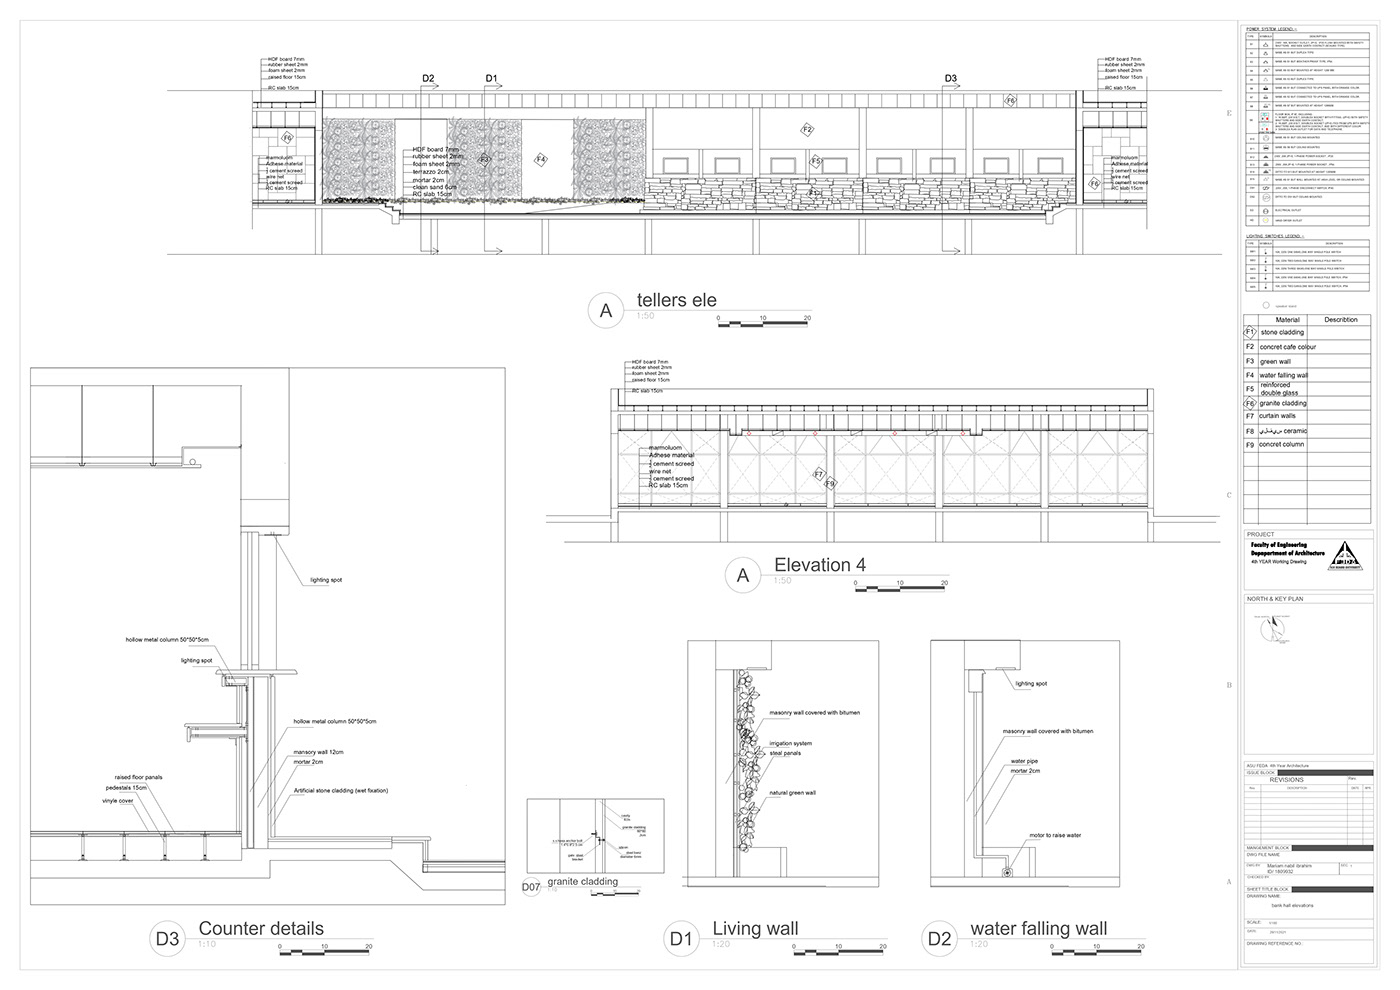 working drawings architecture shop drawing AutoCAD pixel ASU Elevation